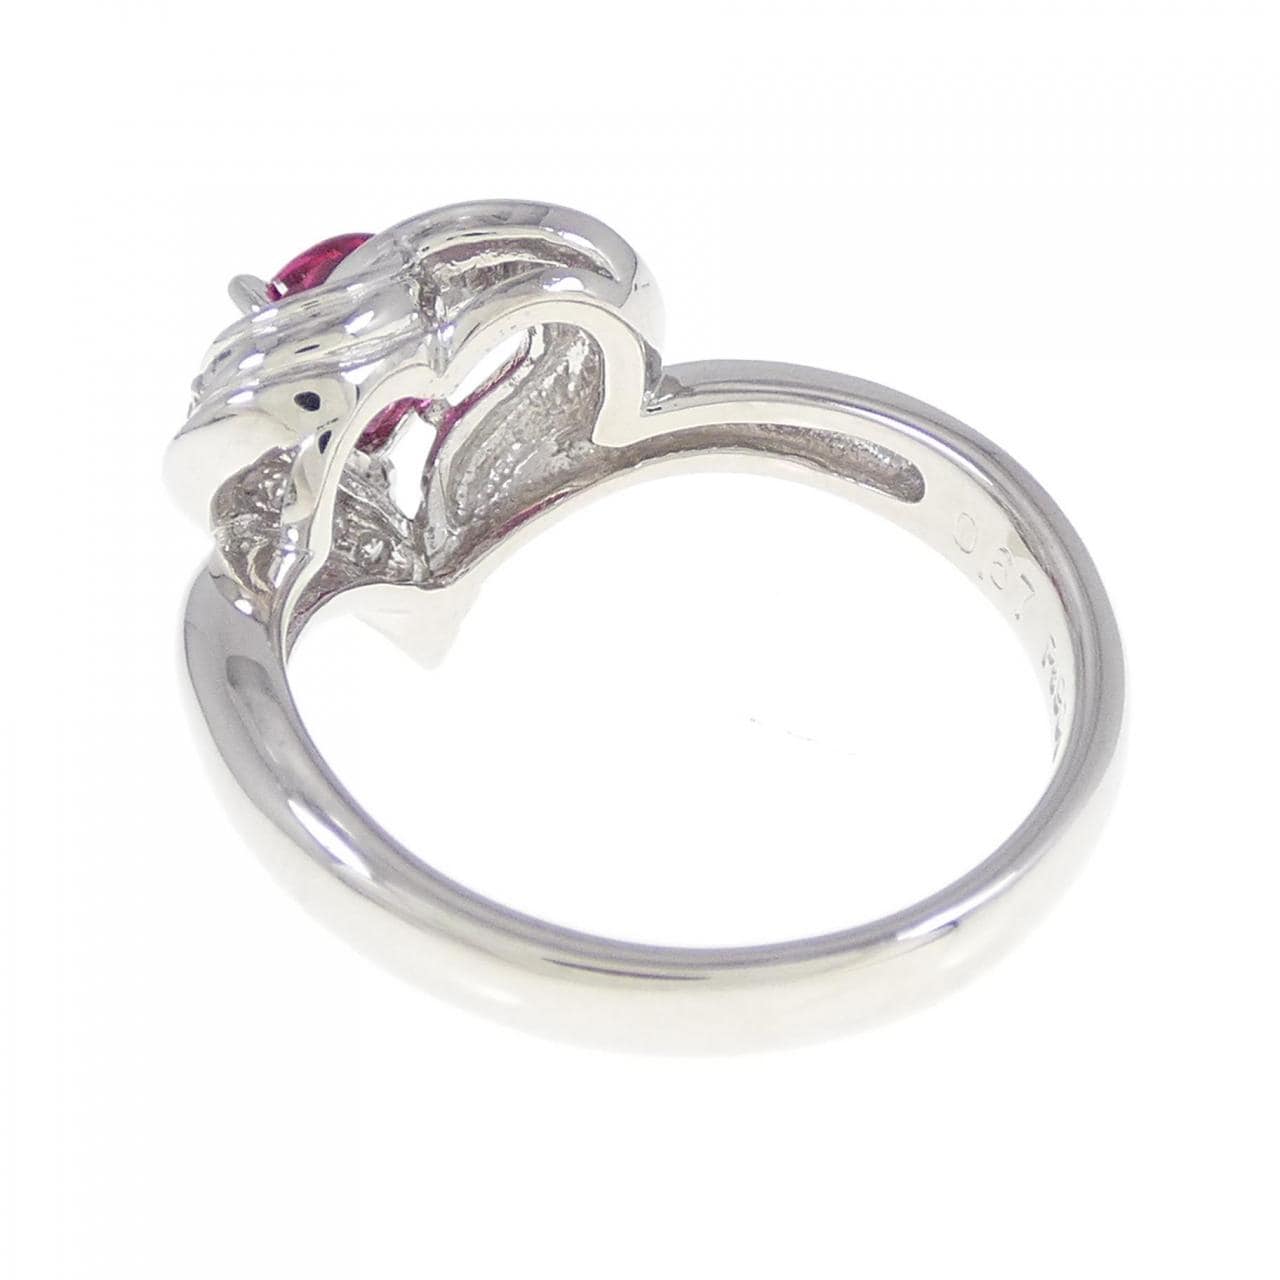 PT Heart Ruby Ring 0.67CT